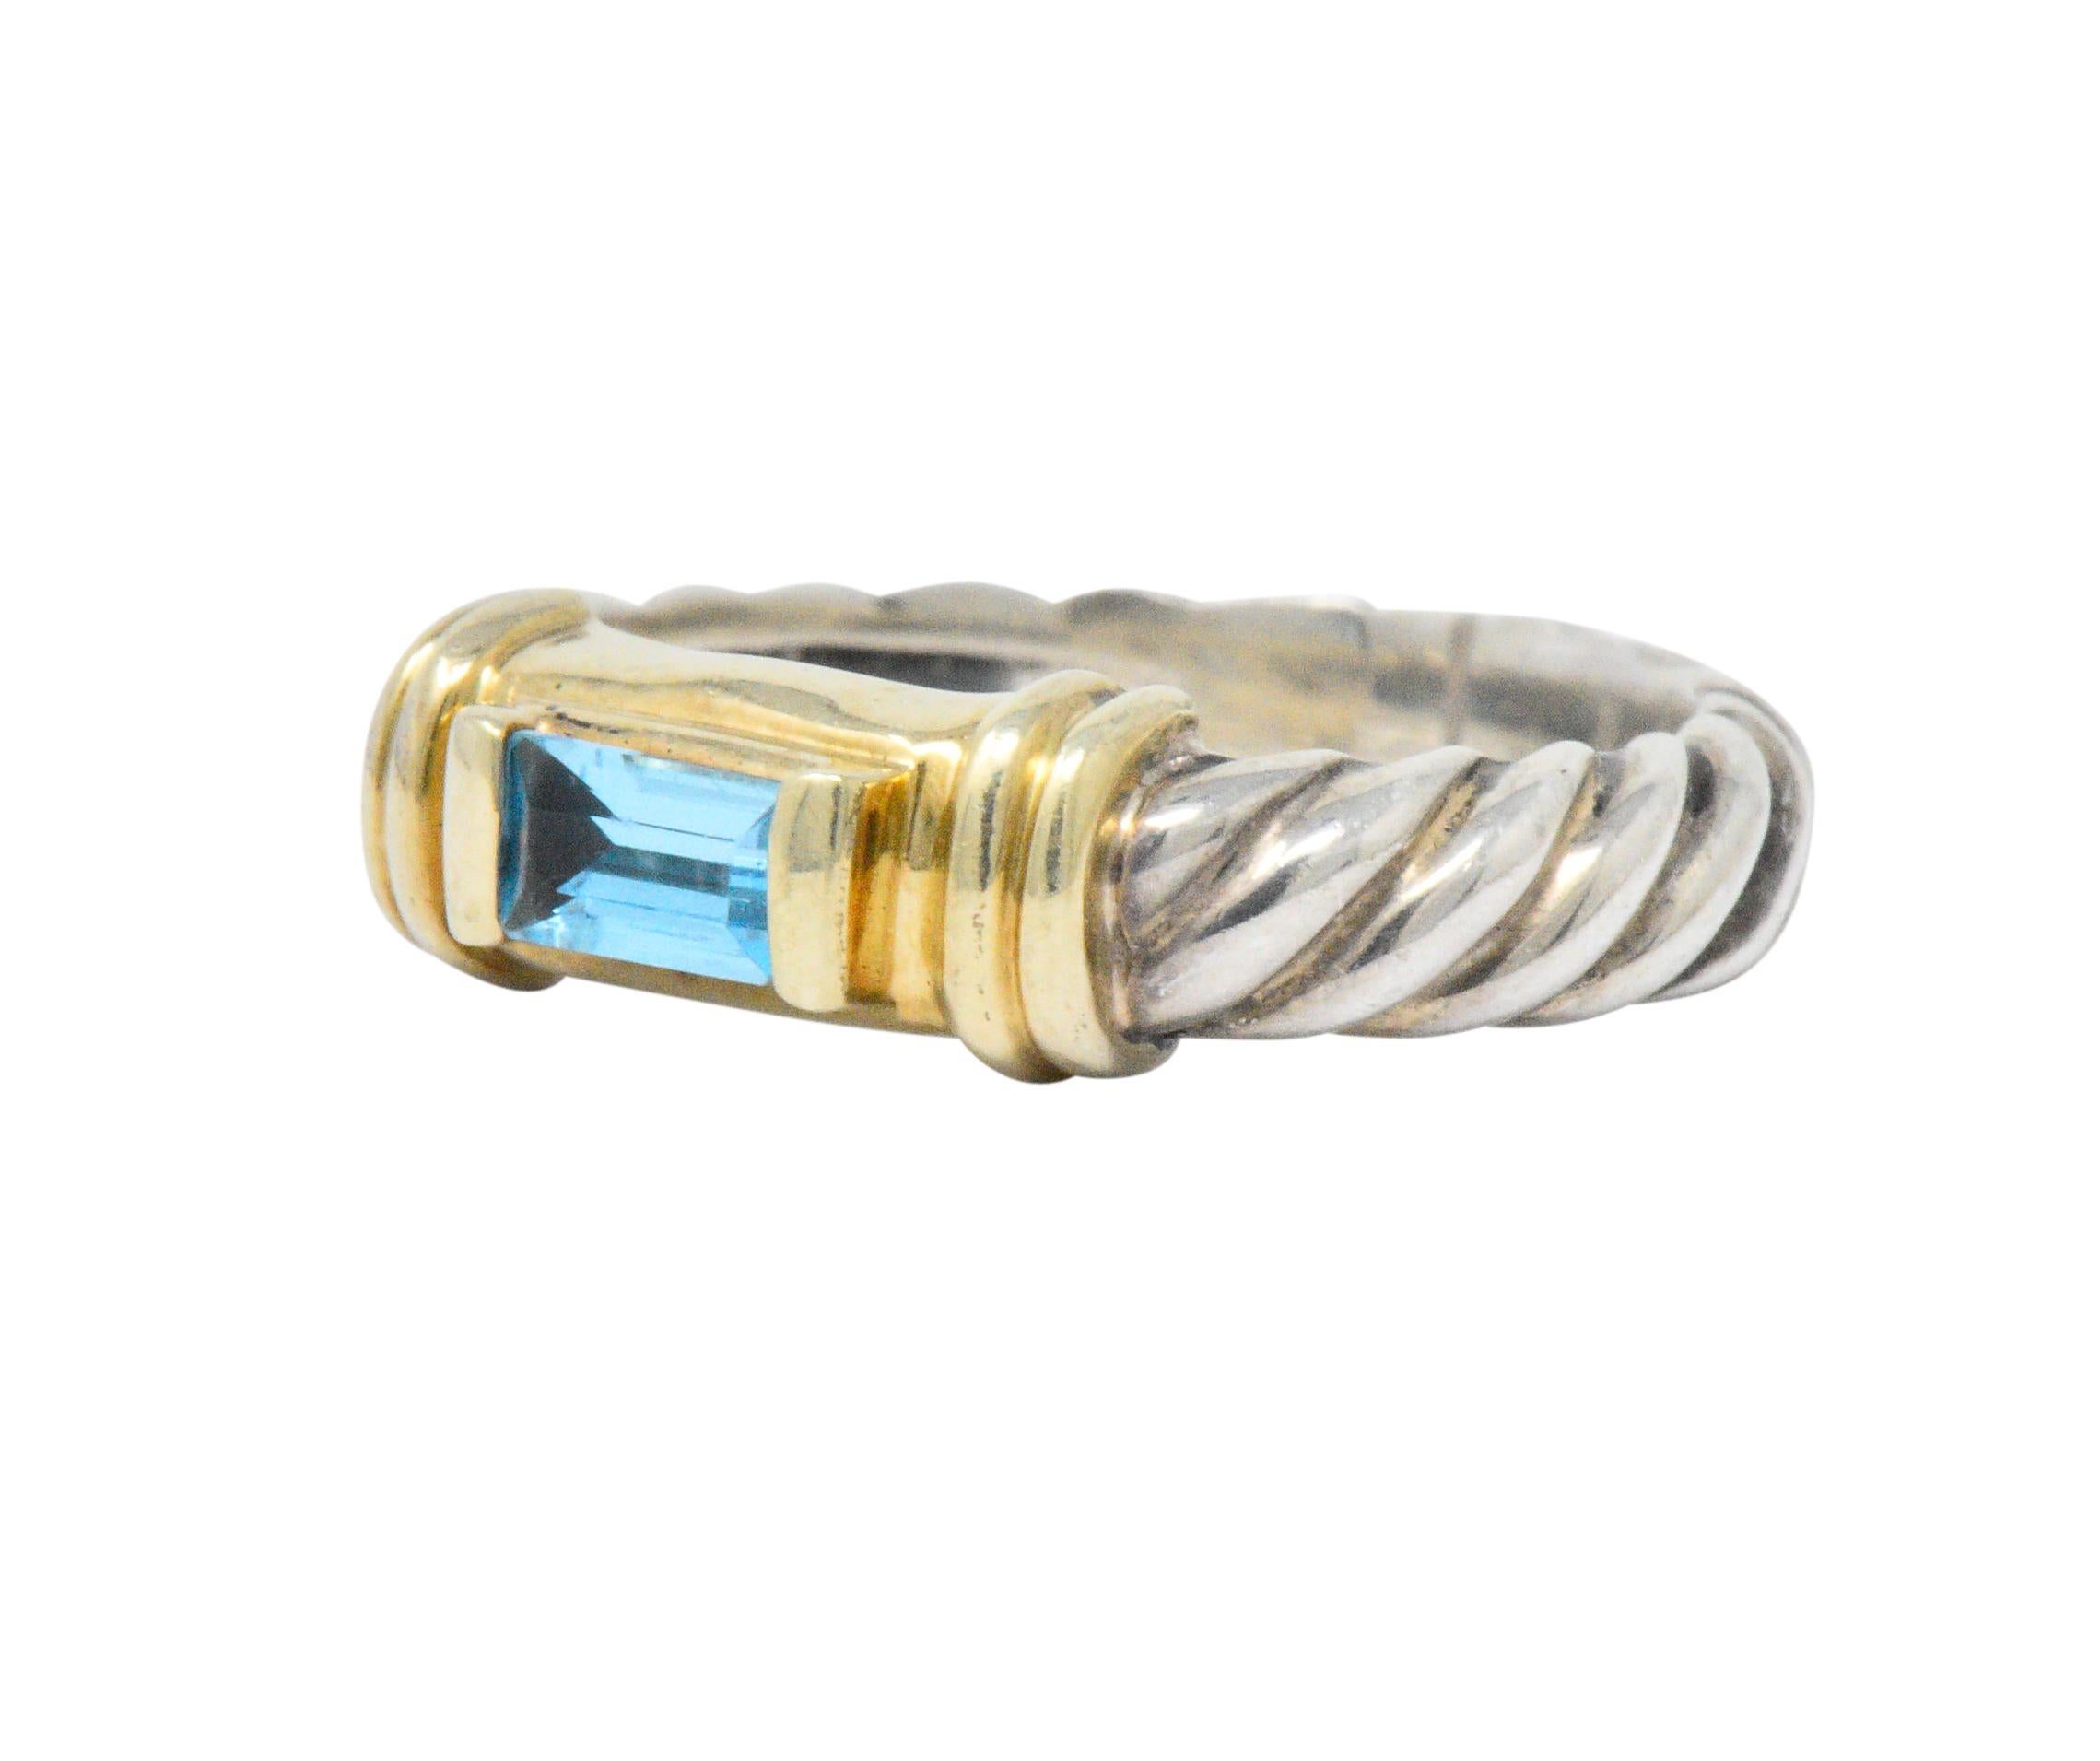 Centering an emerald cut blue topaz, crisp medium blue

Prong set with 14k gold elongated tabs on each end of the stone

14k gold ribbed accents flank stone and sterling silver cable twist band complete the ring

Signed 525 DY 925

Top measures 5 mm